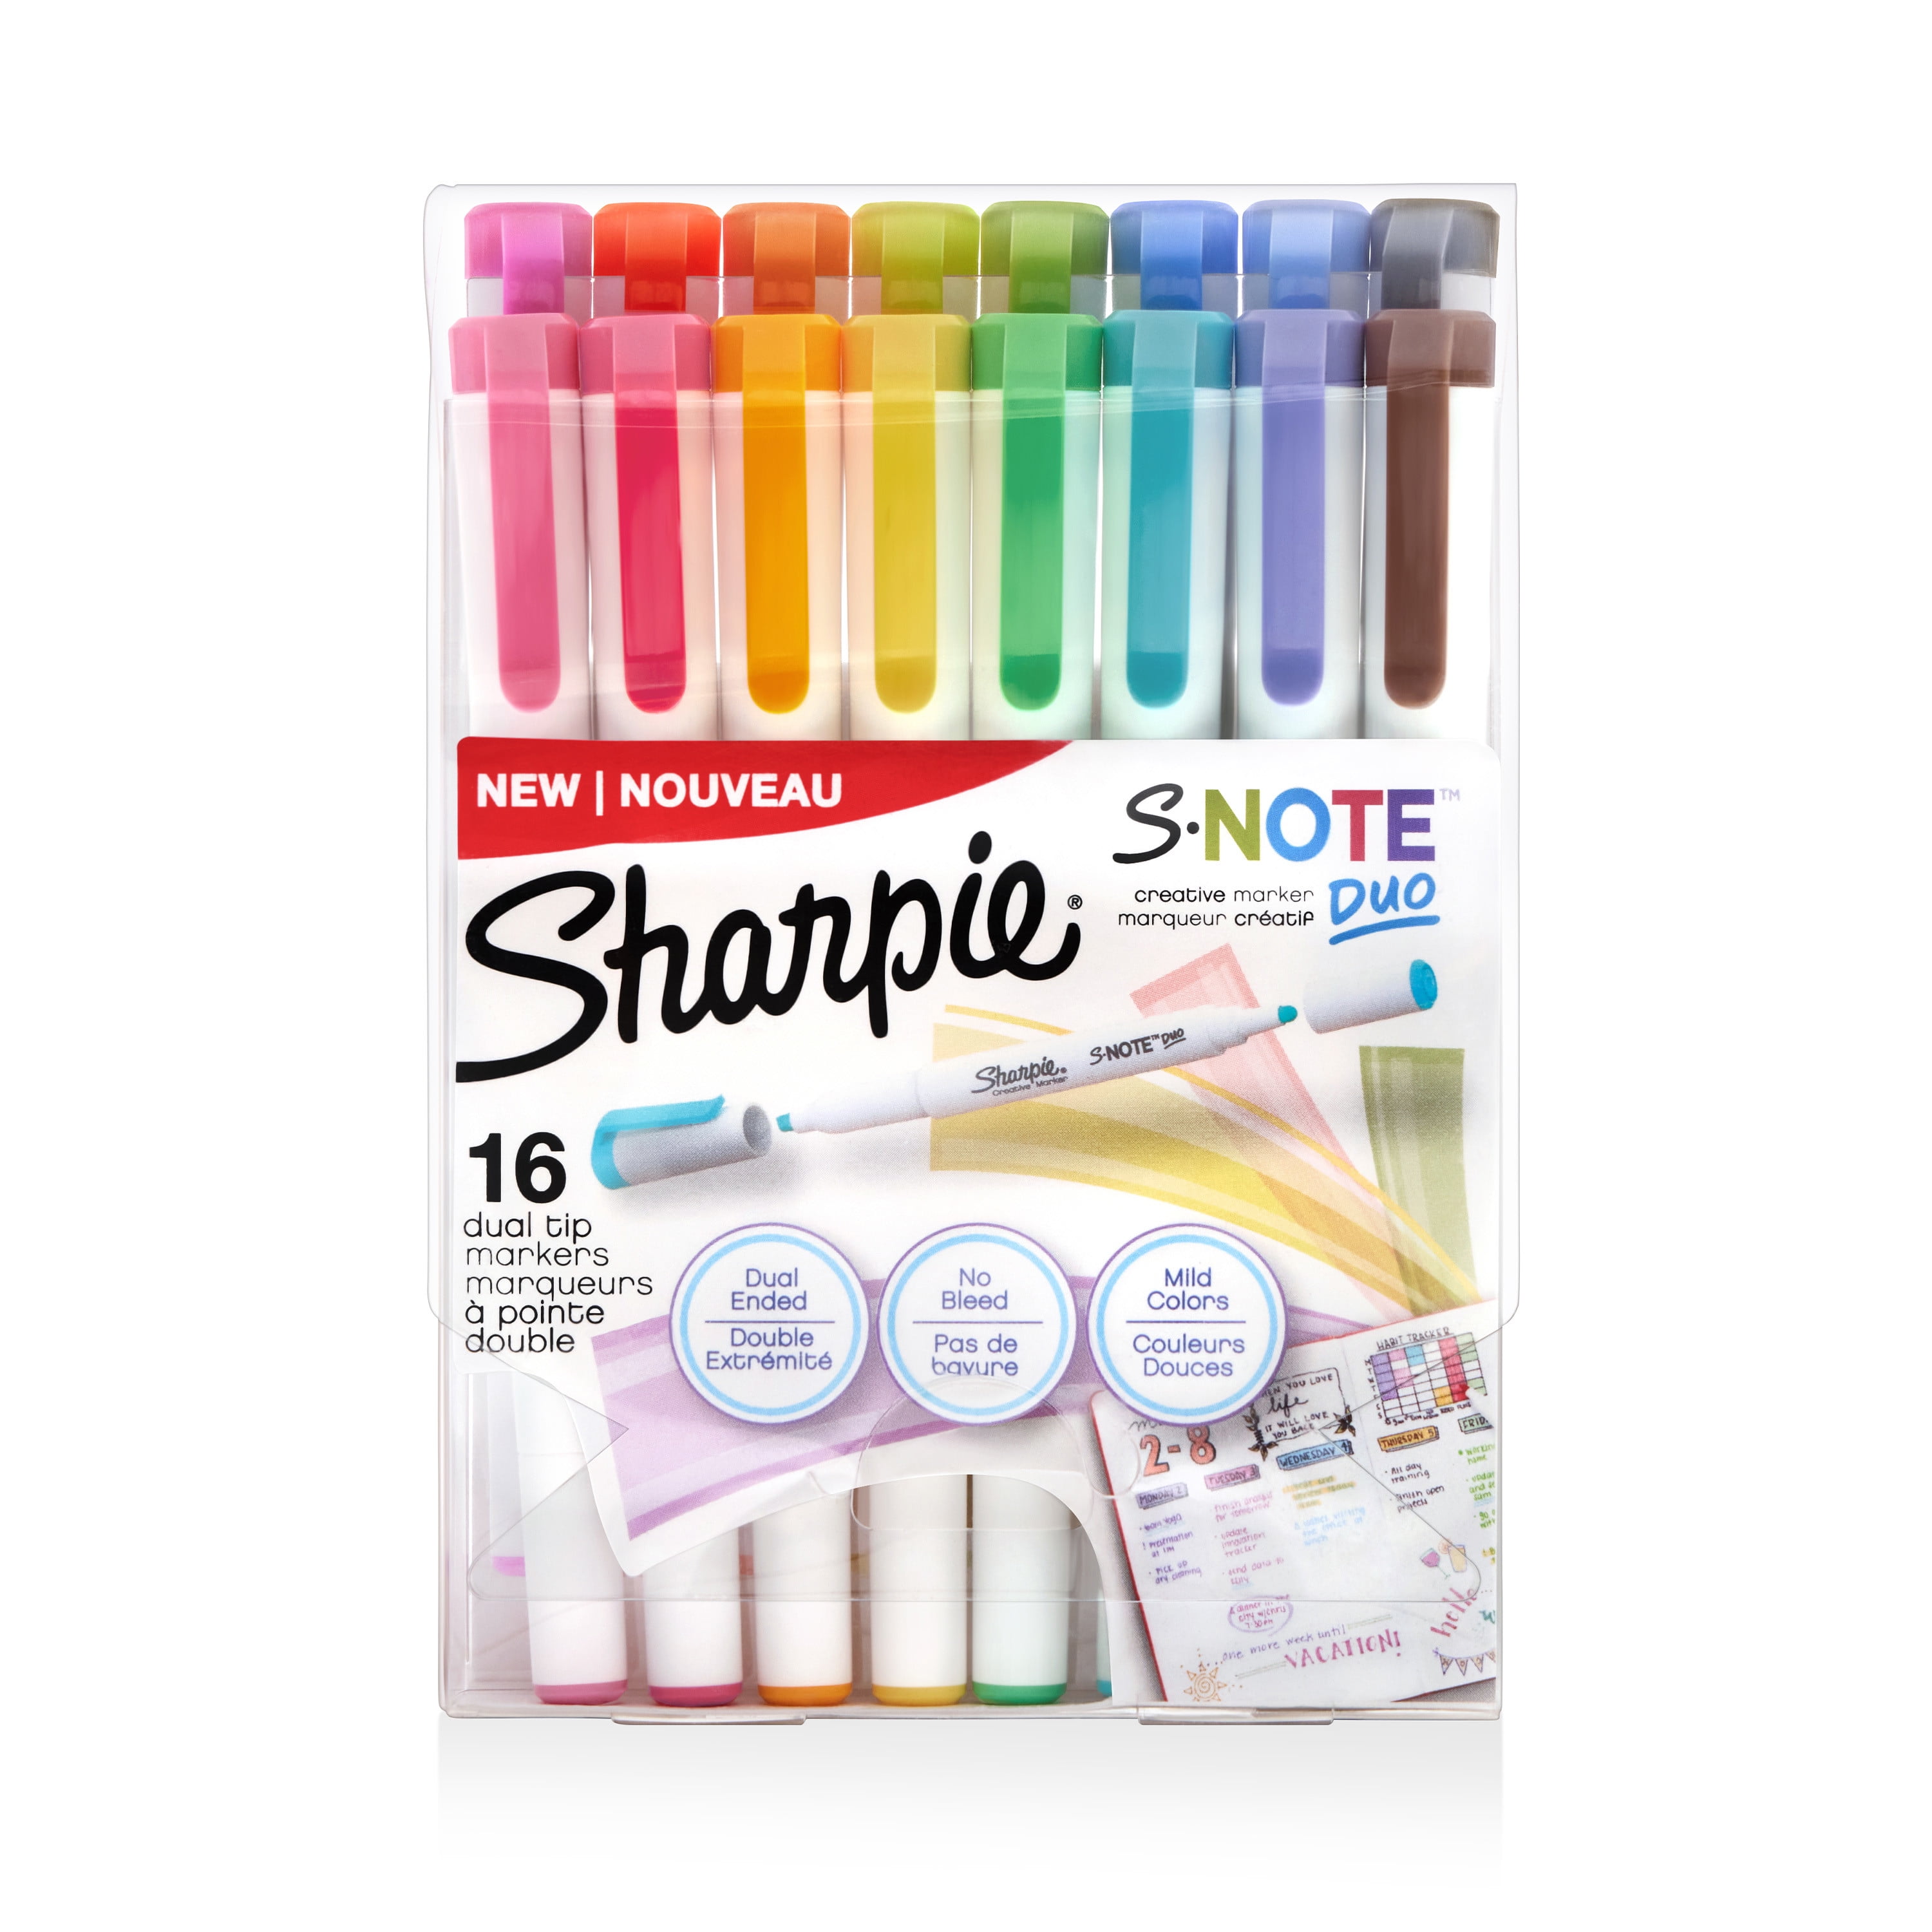 Sharpie S-Note Creative Markers Review - Rae's Daily Page